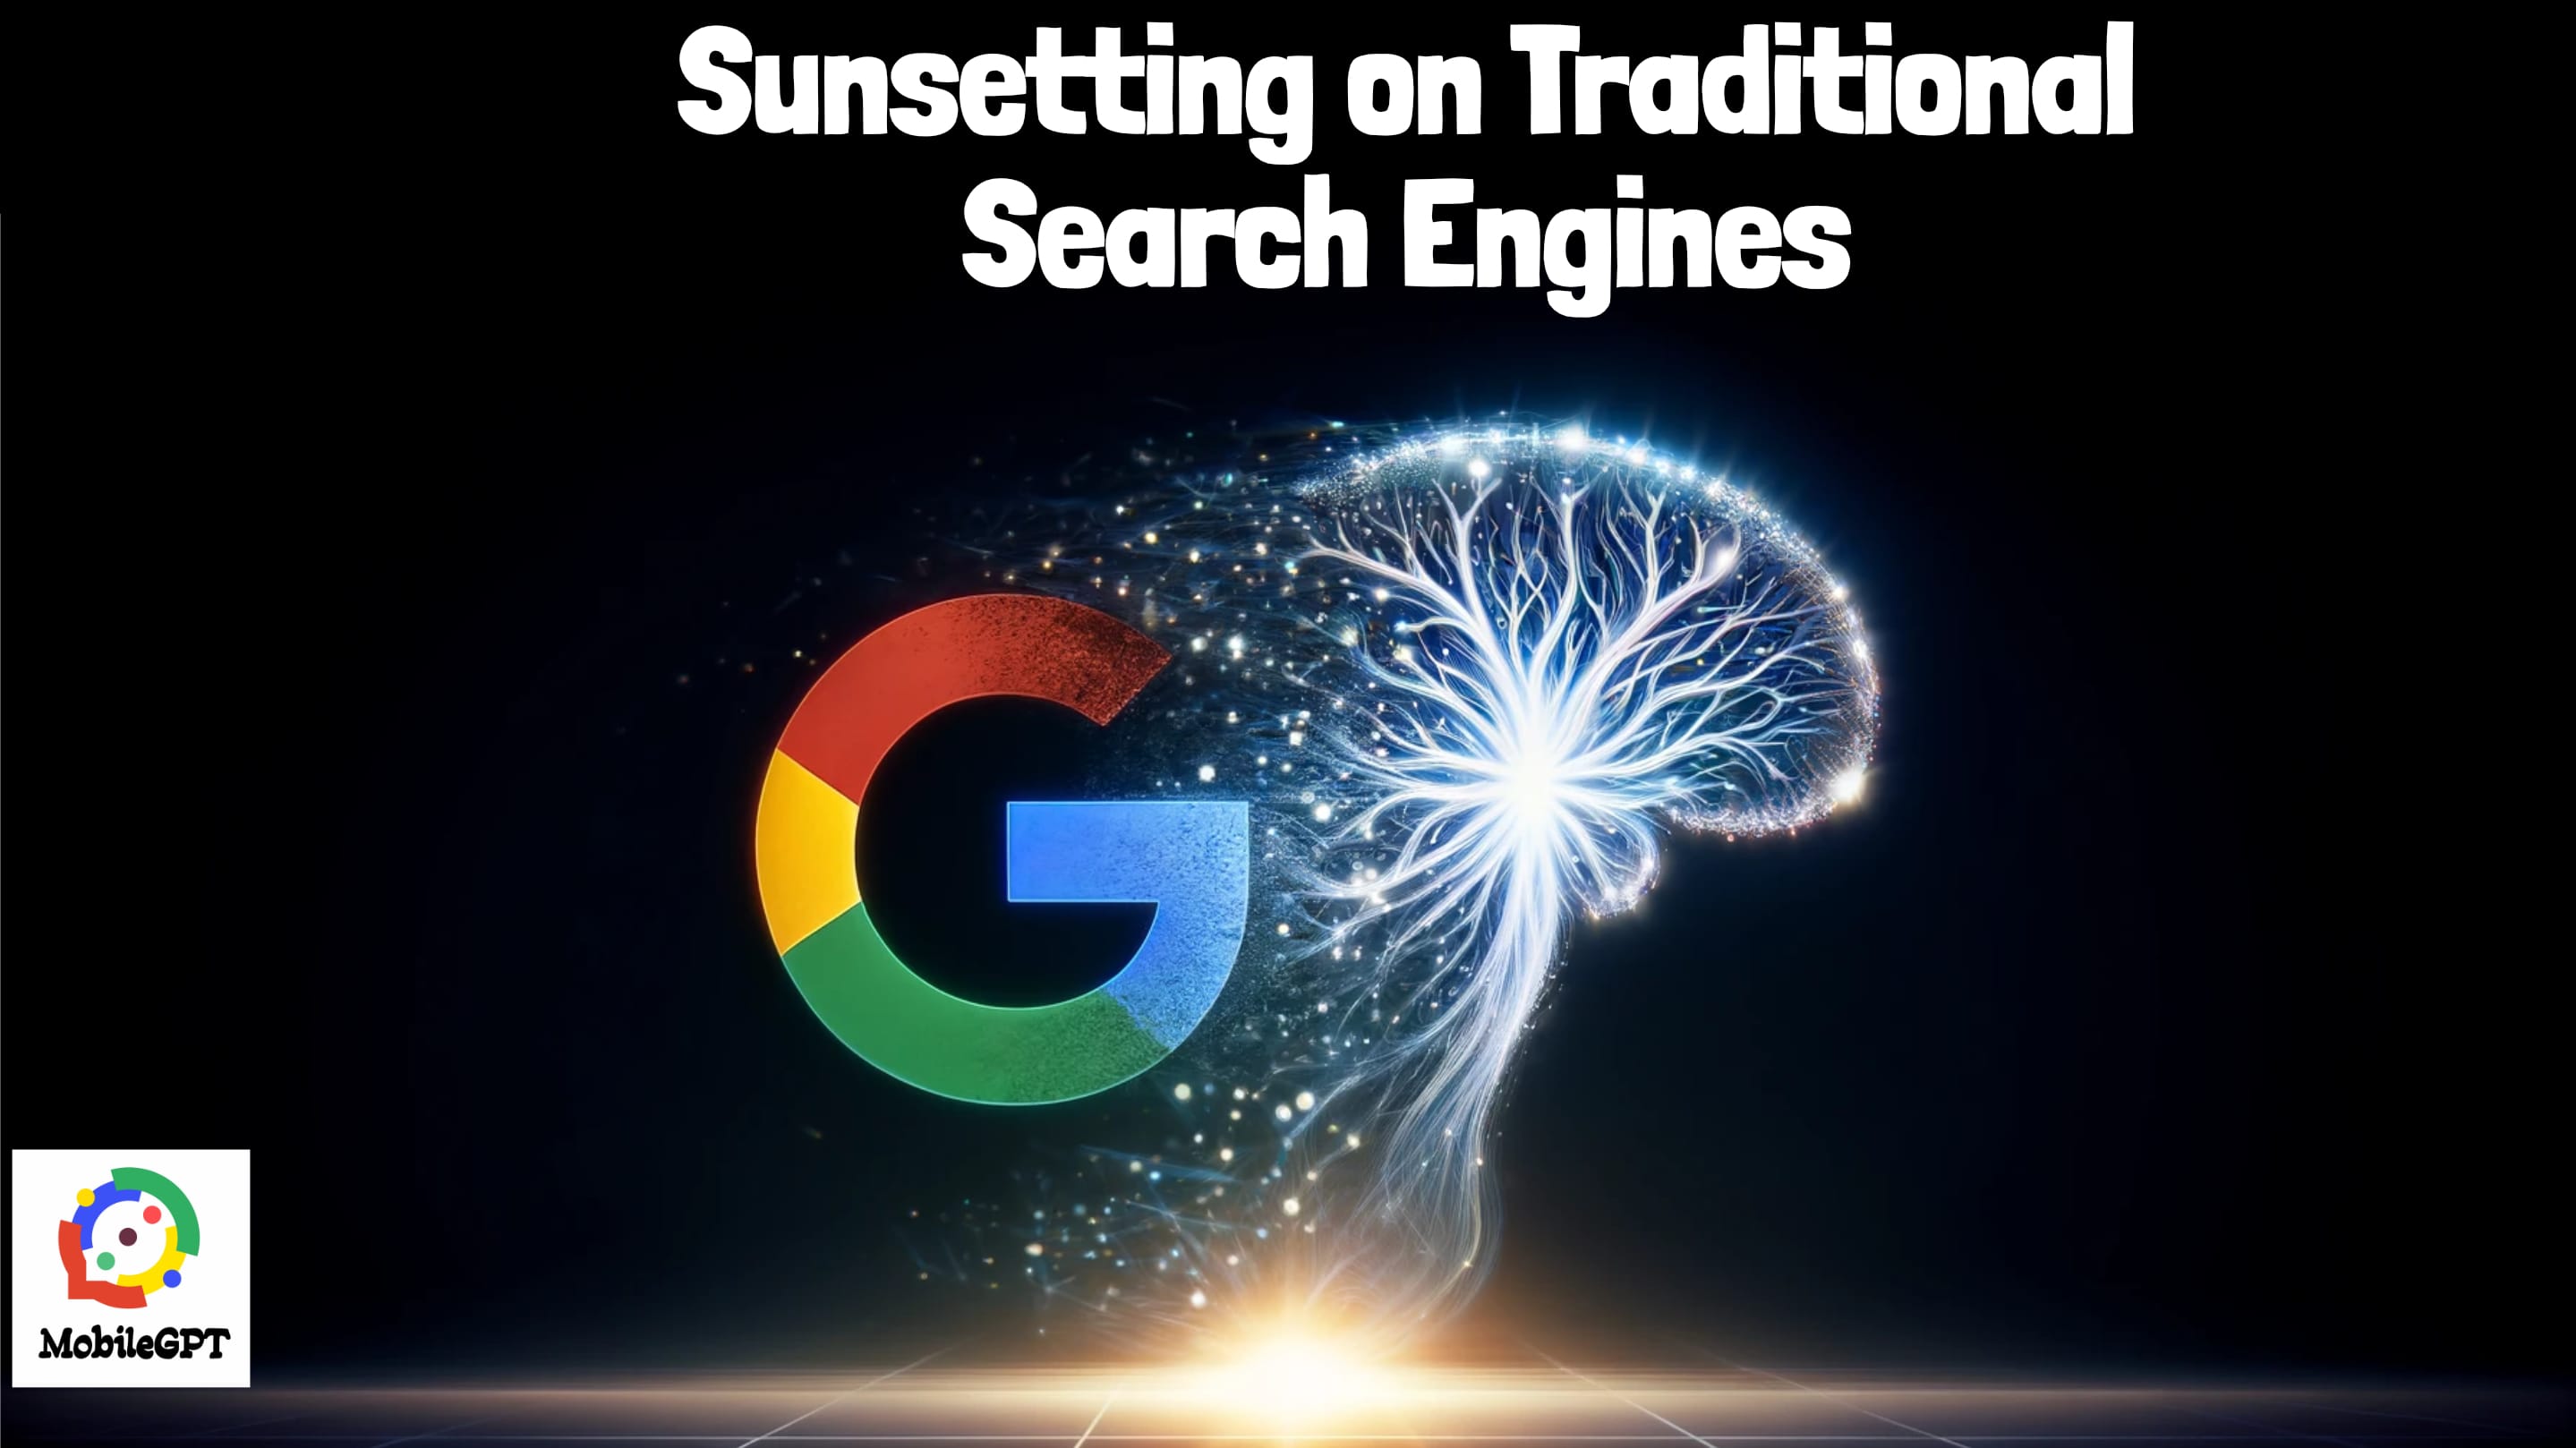 Bye bye Google: Why Traditional Search Engines Are Becoming Yesterday's News